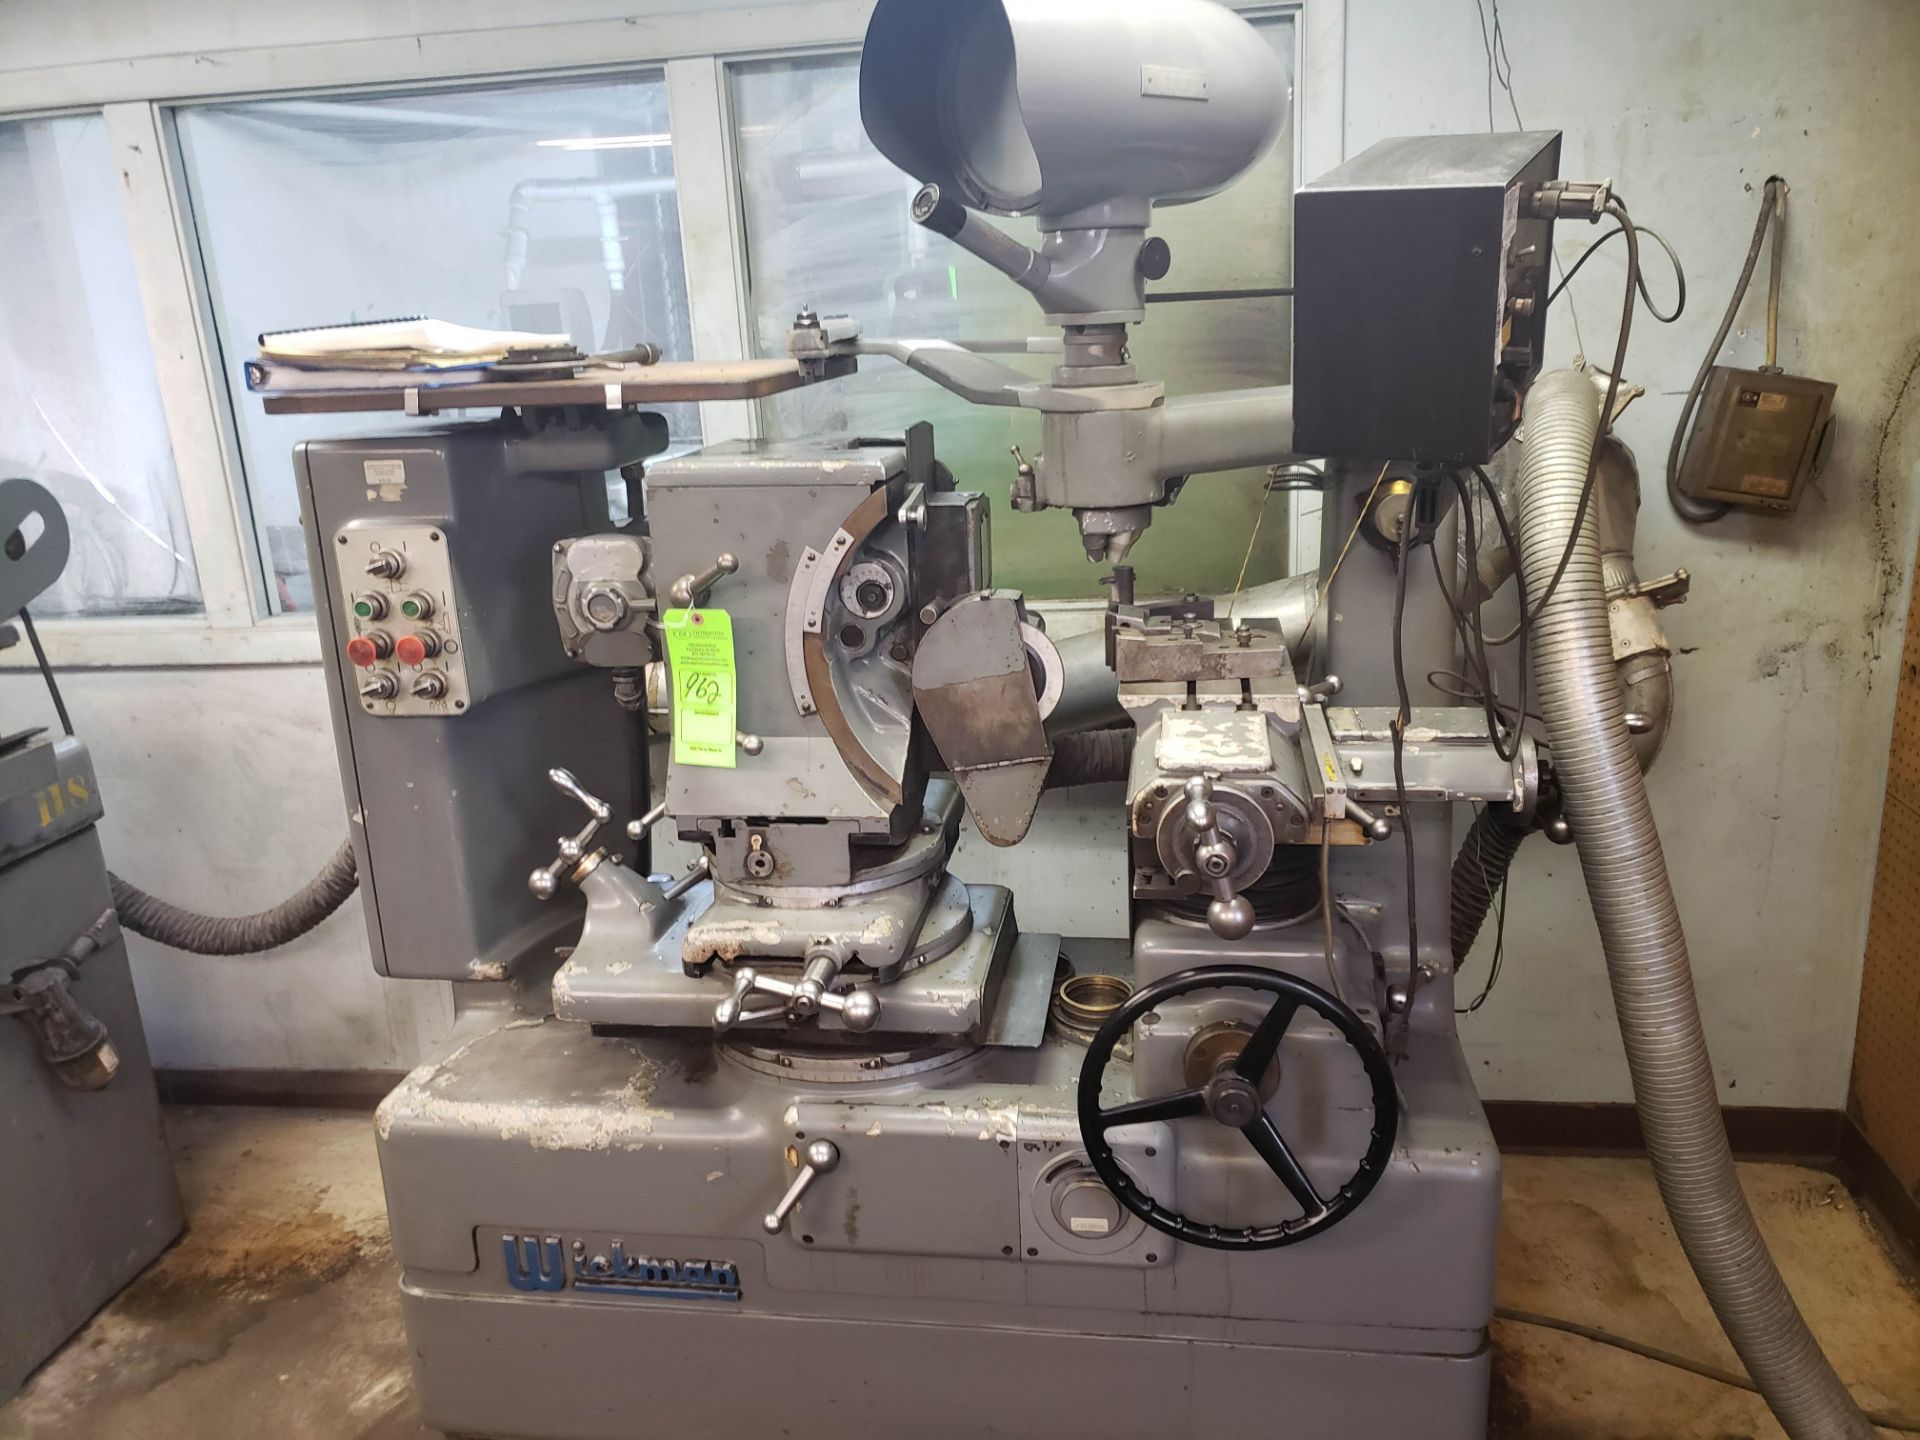 WICKMAN OPTICAL PROFILE GRINDING MACHINE MODEL-690038 INSP. NO. 489-13 W/ TAYLOR HOBSON PROJECTION - Image 2 of 2